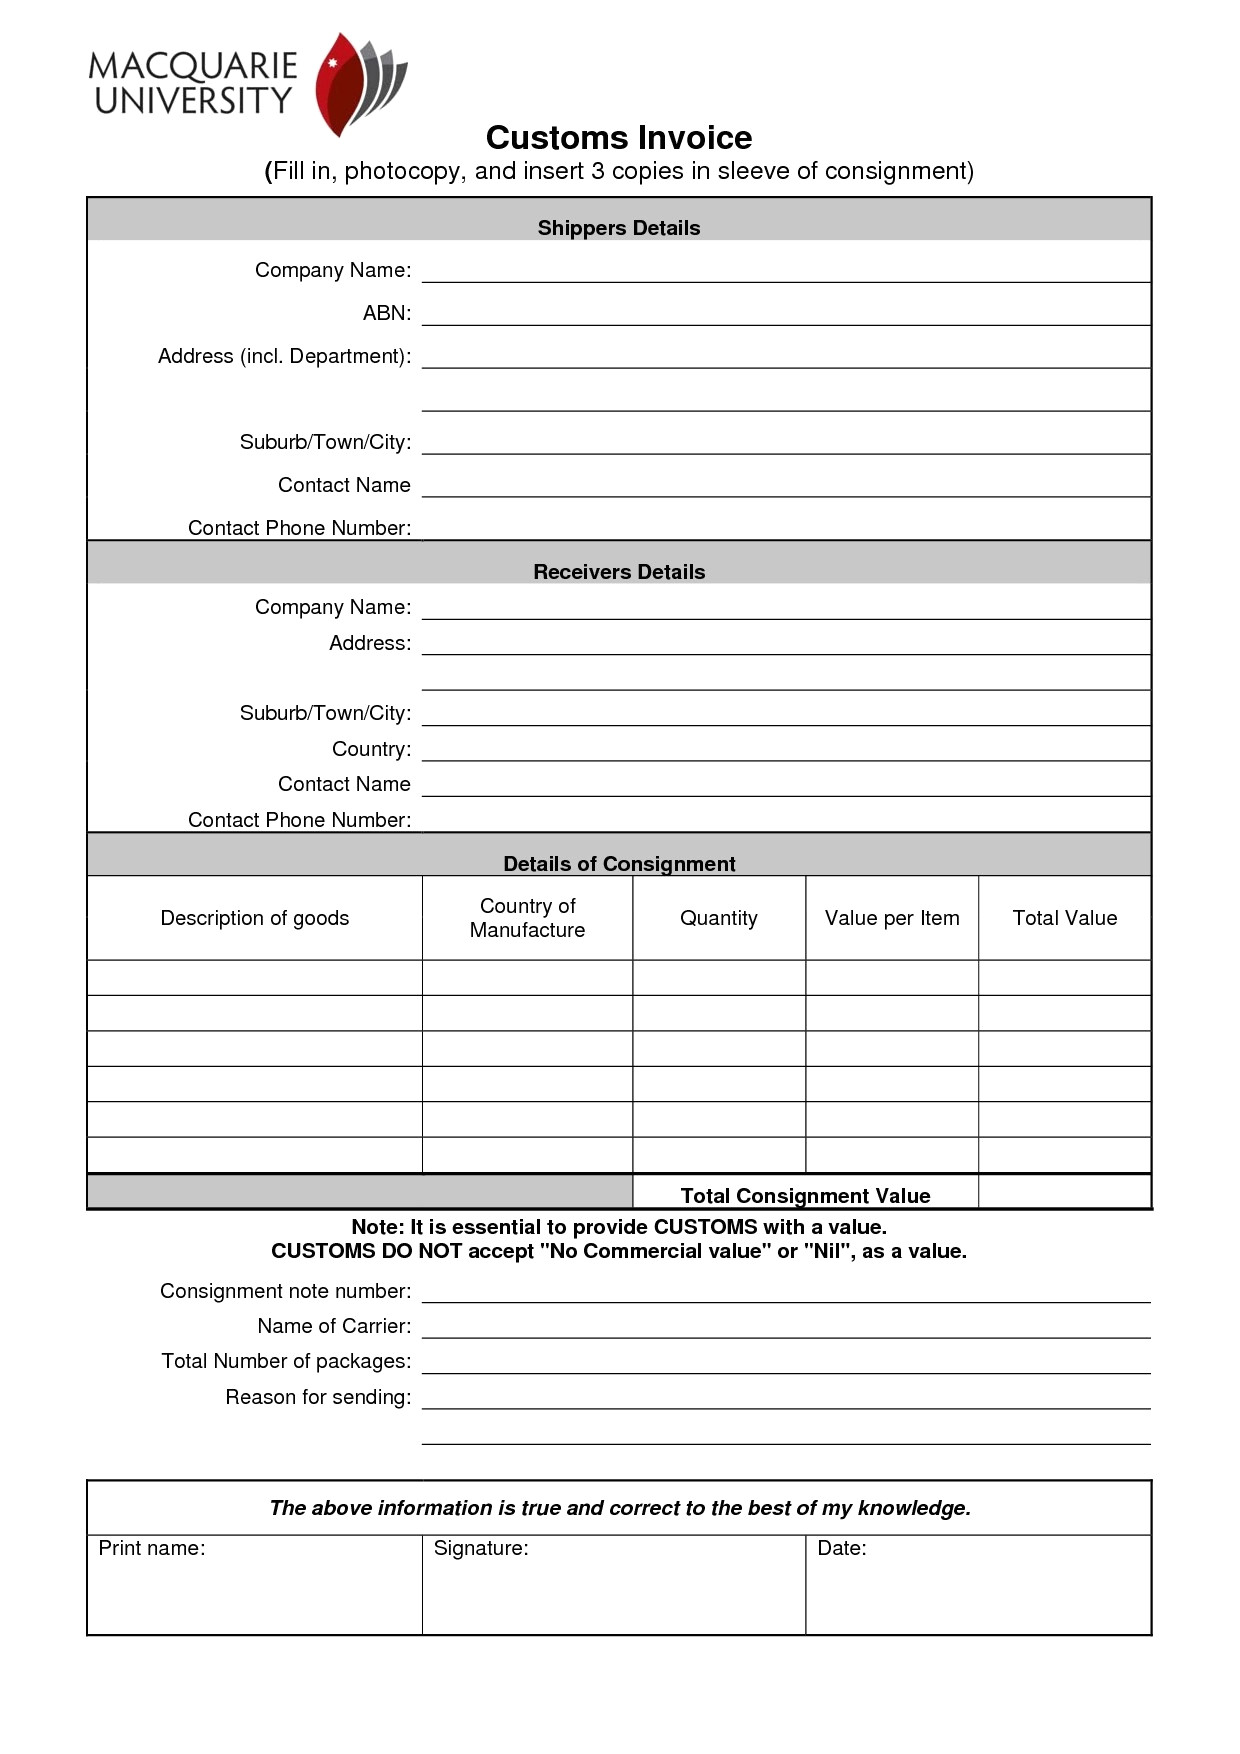 22579 personal chef invoice template the hidden agenda of personal chef invoice template